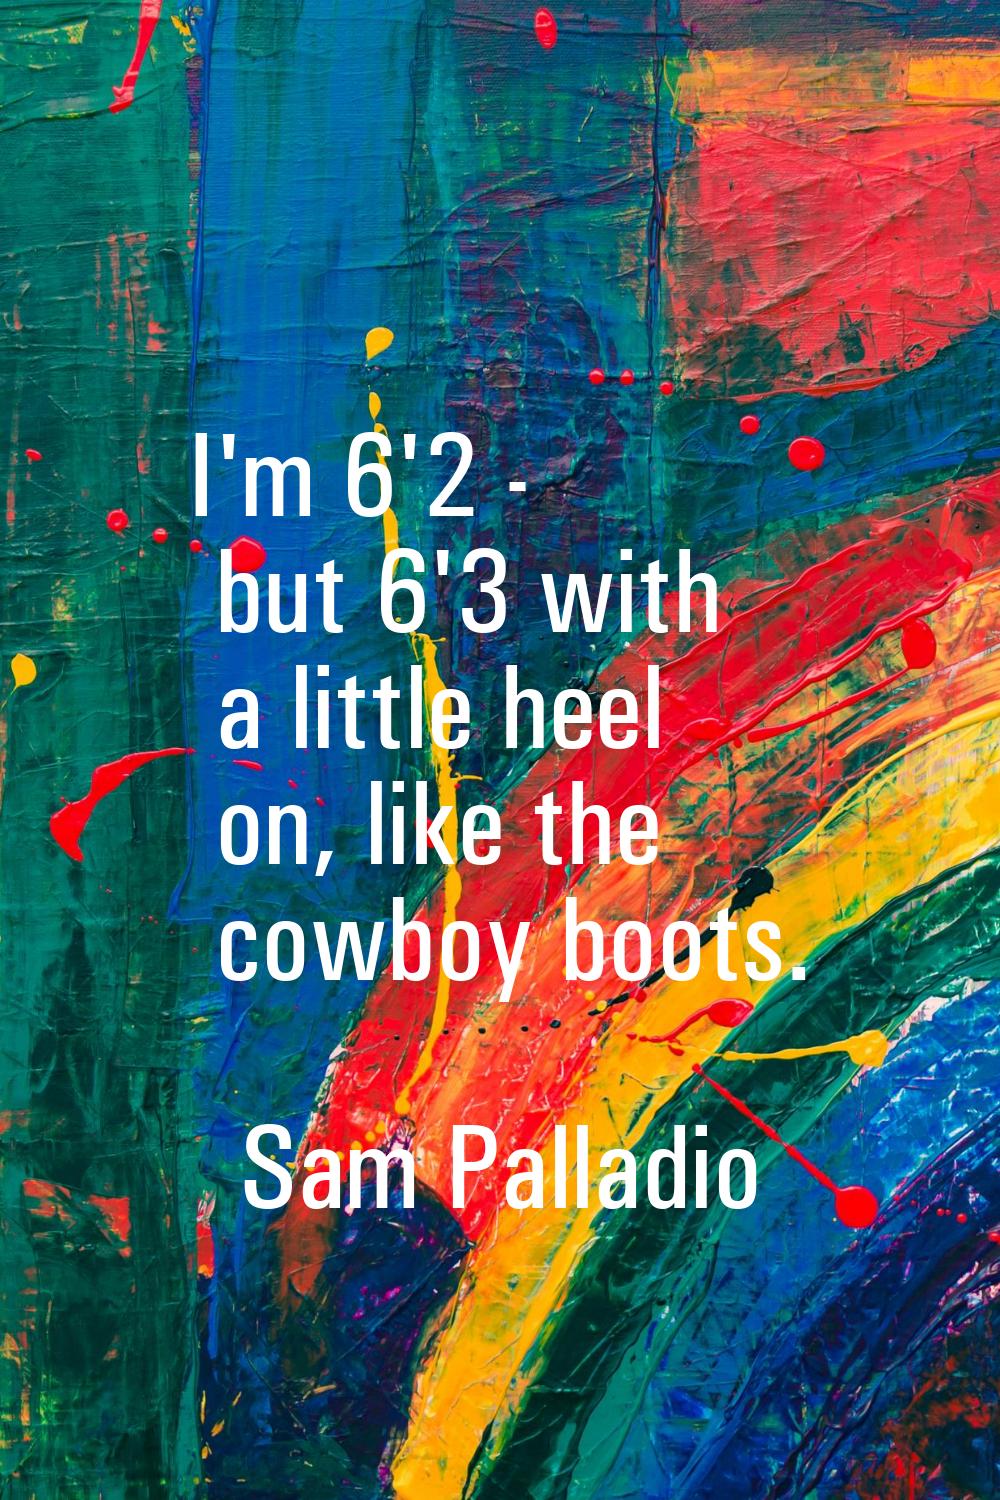 I'm 6'2 - but 6'3 with a little heel on, like the cowboy boots.